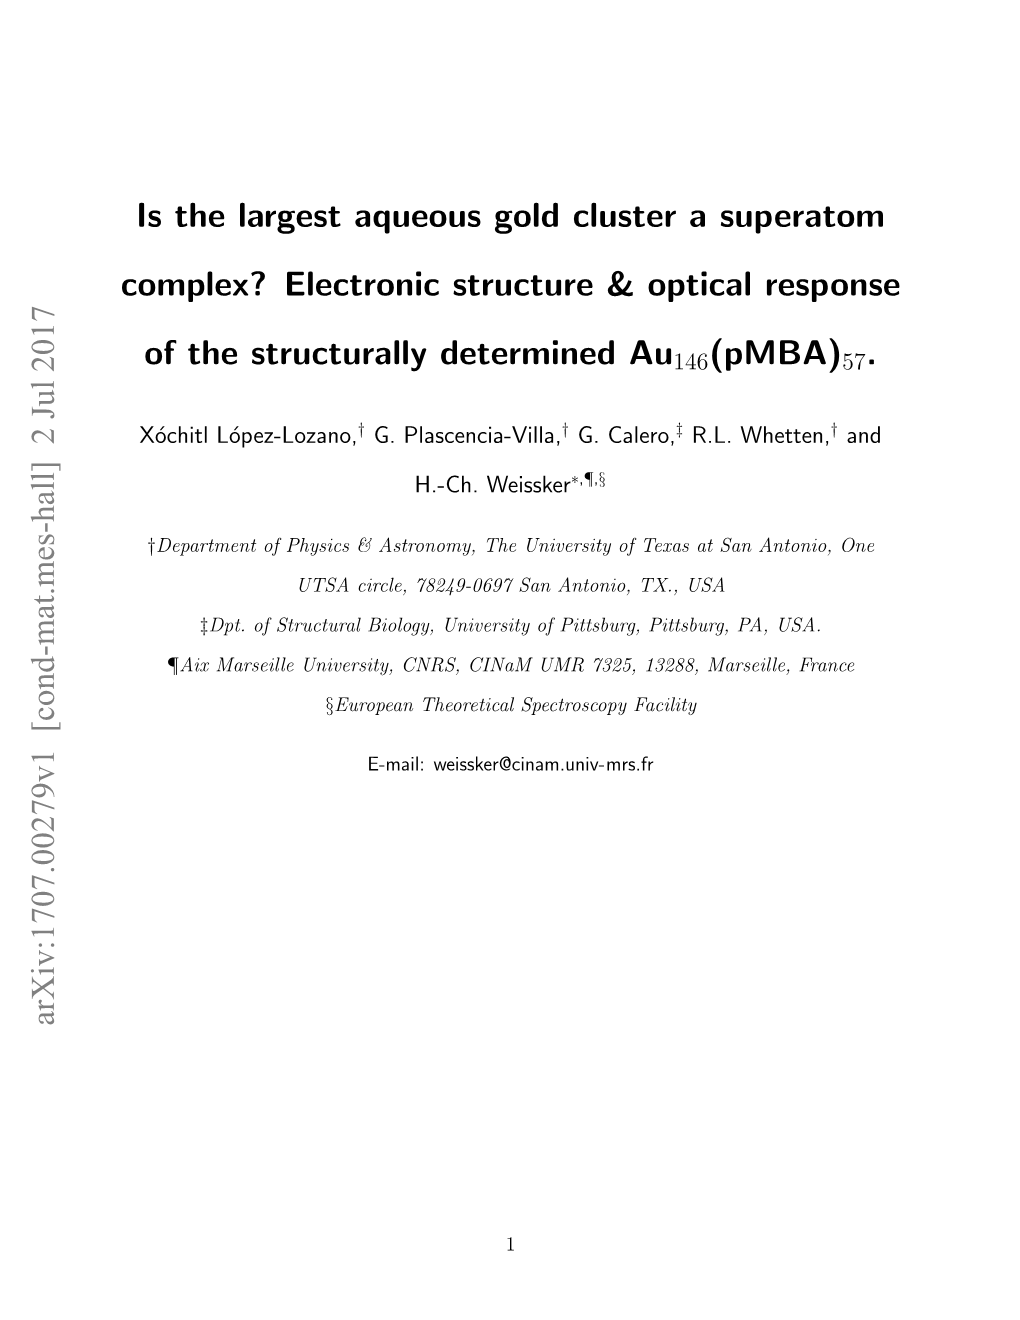 Is the Largest Aqueous Gold Cluster a Superatom Complex? Electronic Structure & Optical Response